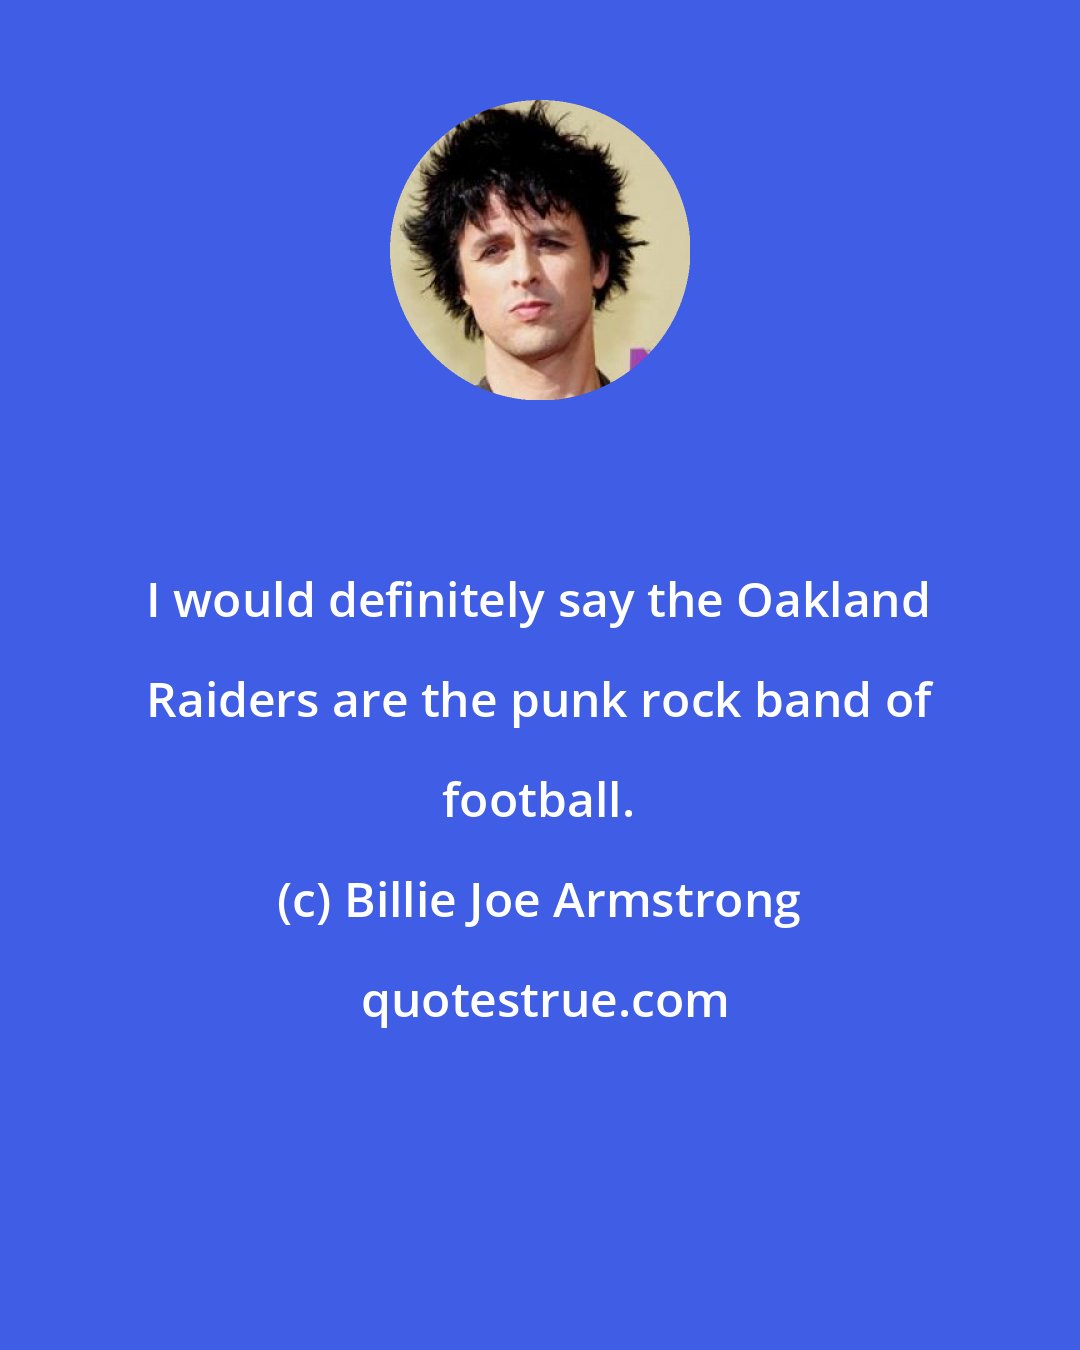 Billie Joe Armstrong: I would definitely say the Oakland Raiders are the punk rock band of football.